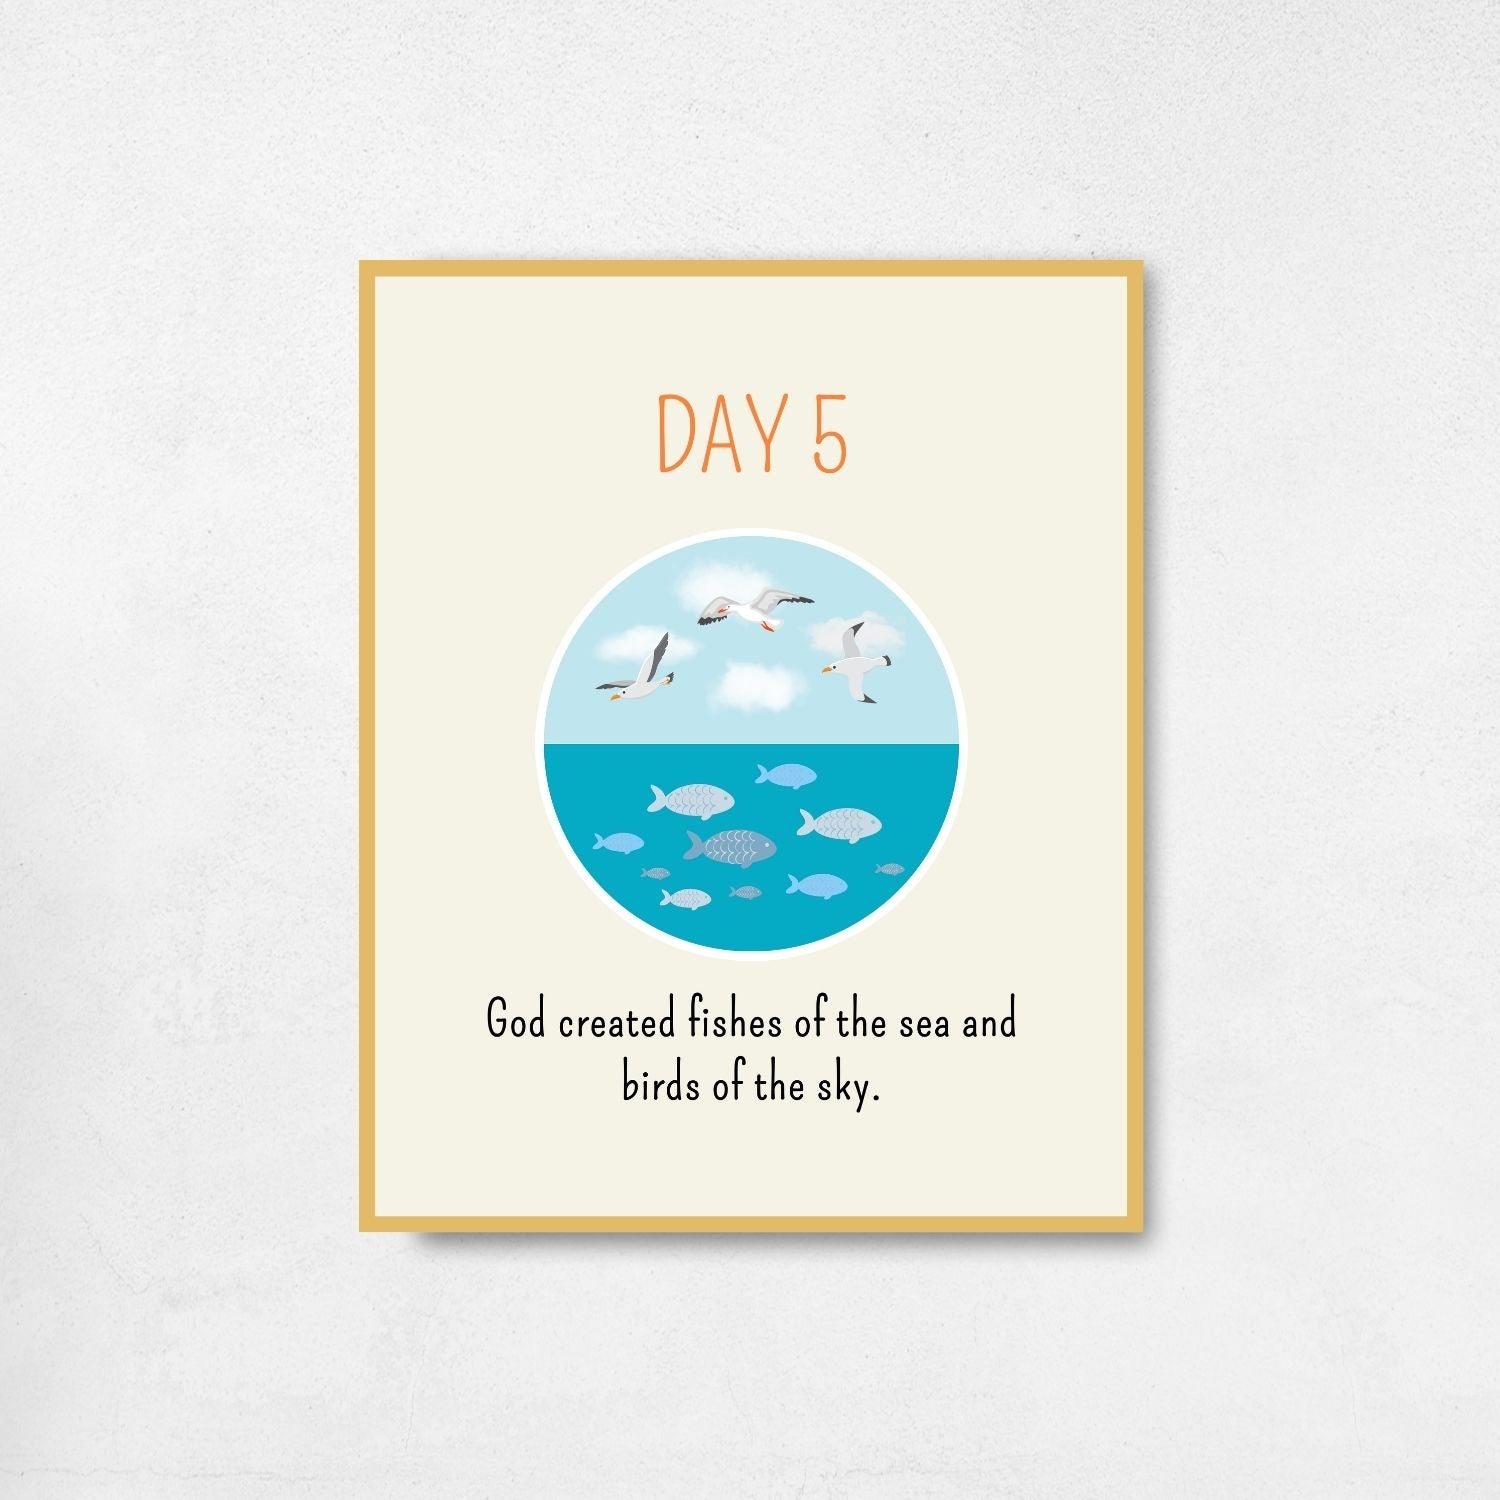 7 Days of Creation Posters for Classroom Decorations